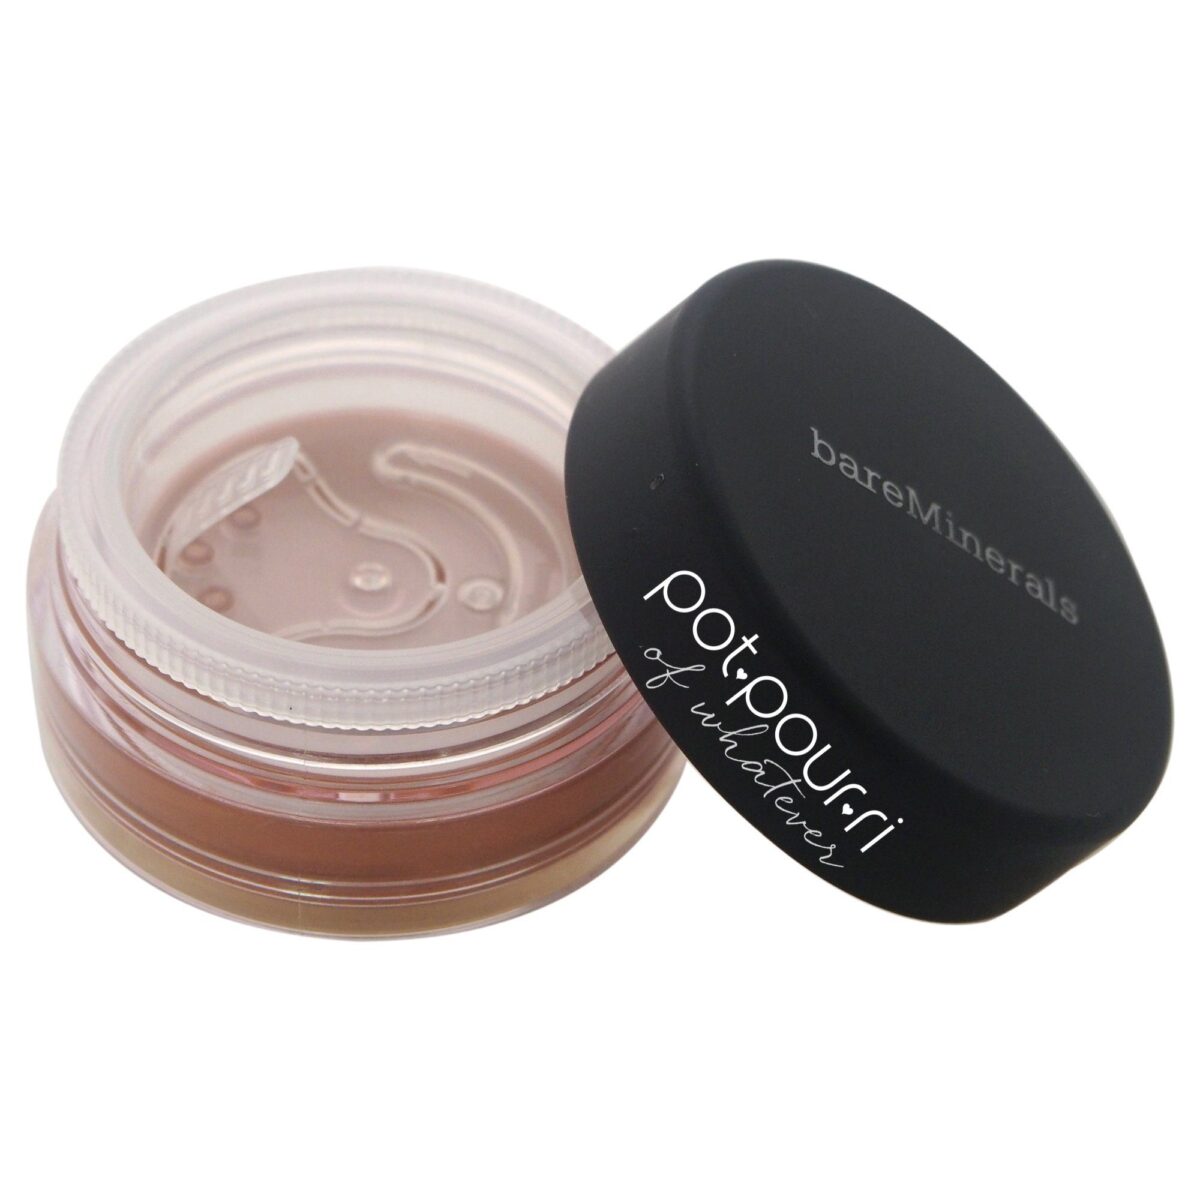 Bare Minerals warmth Click, Lock, and Go sifter